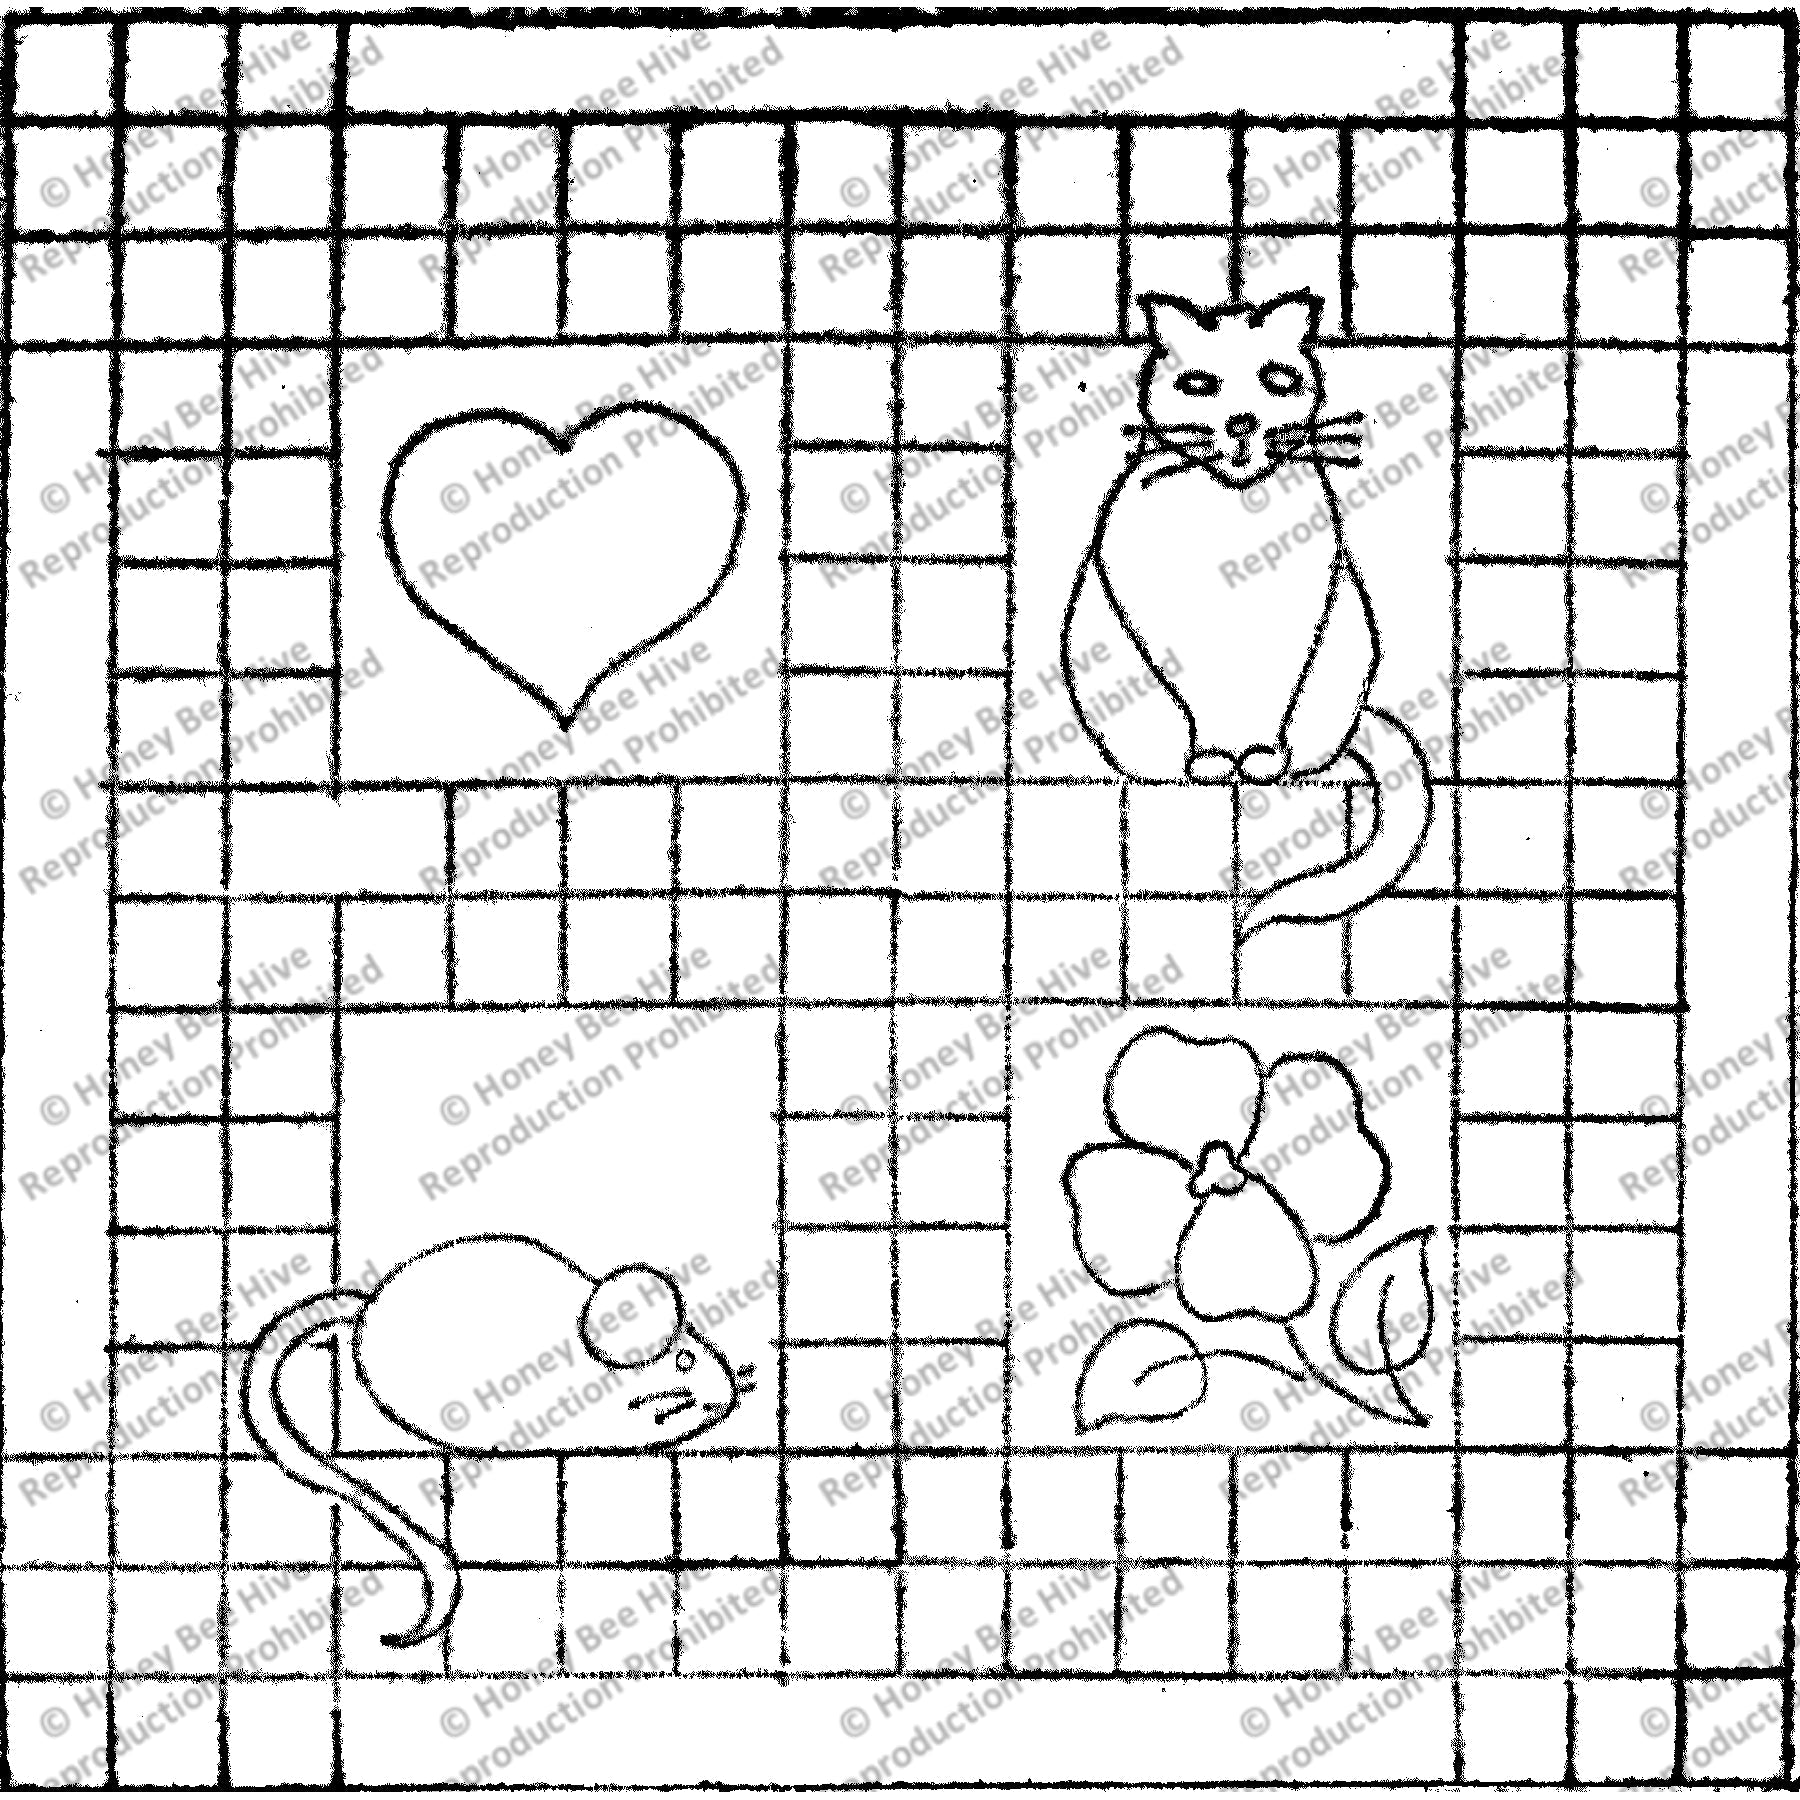 Cat And Mouse, rug hooking pattern